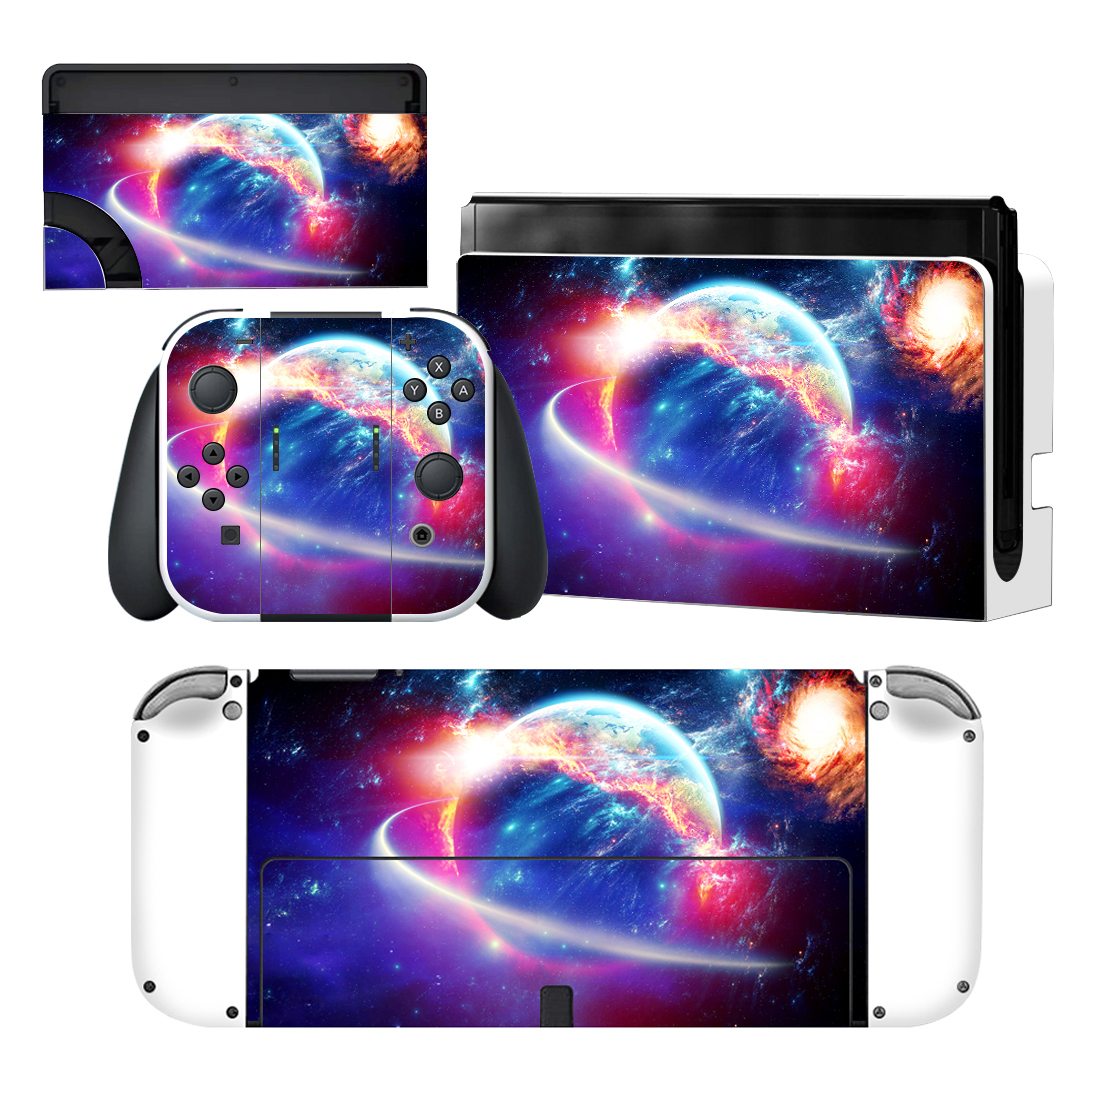 Space Planet Nintendo Switch OLED Skin Sticker Decal 